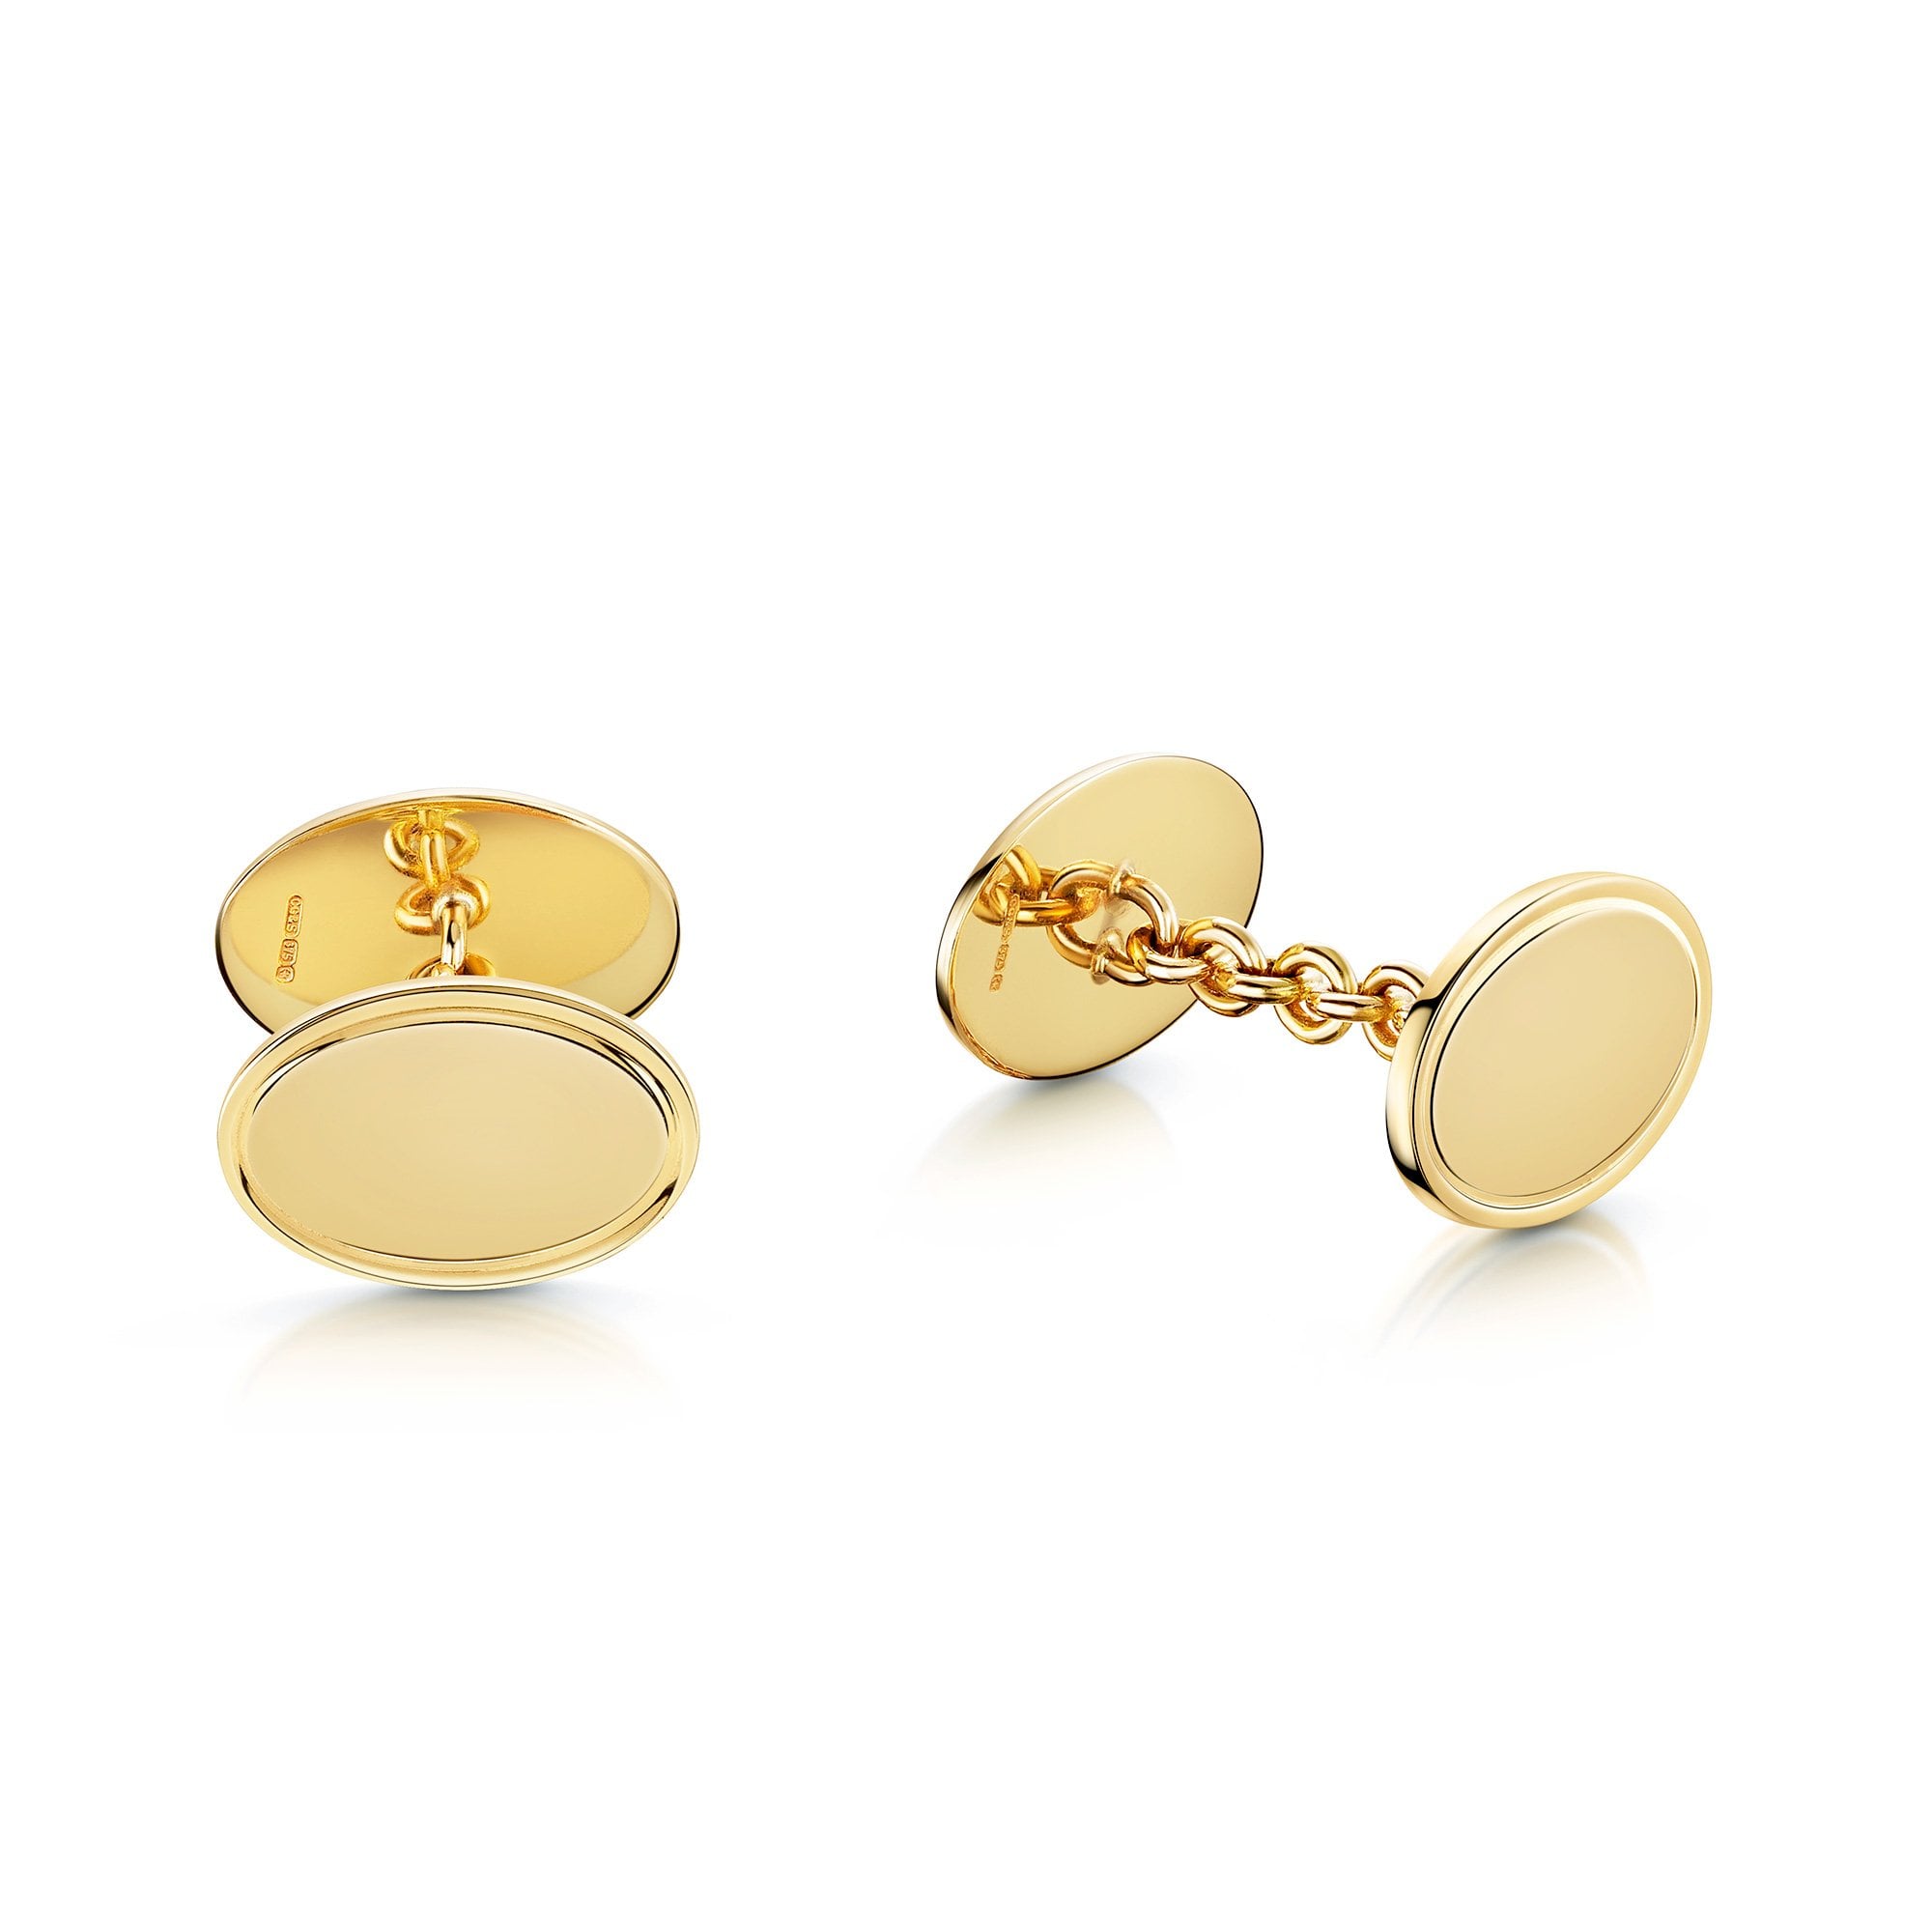 9ct Yellow Gold Oval Chain Link Cufflinks with Engraved Edges